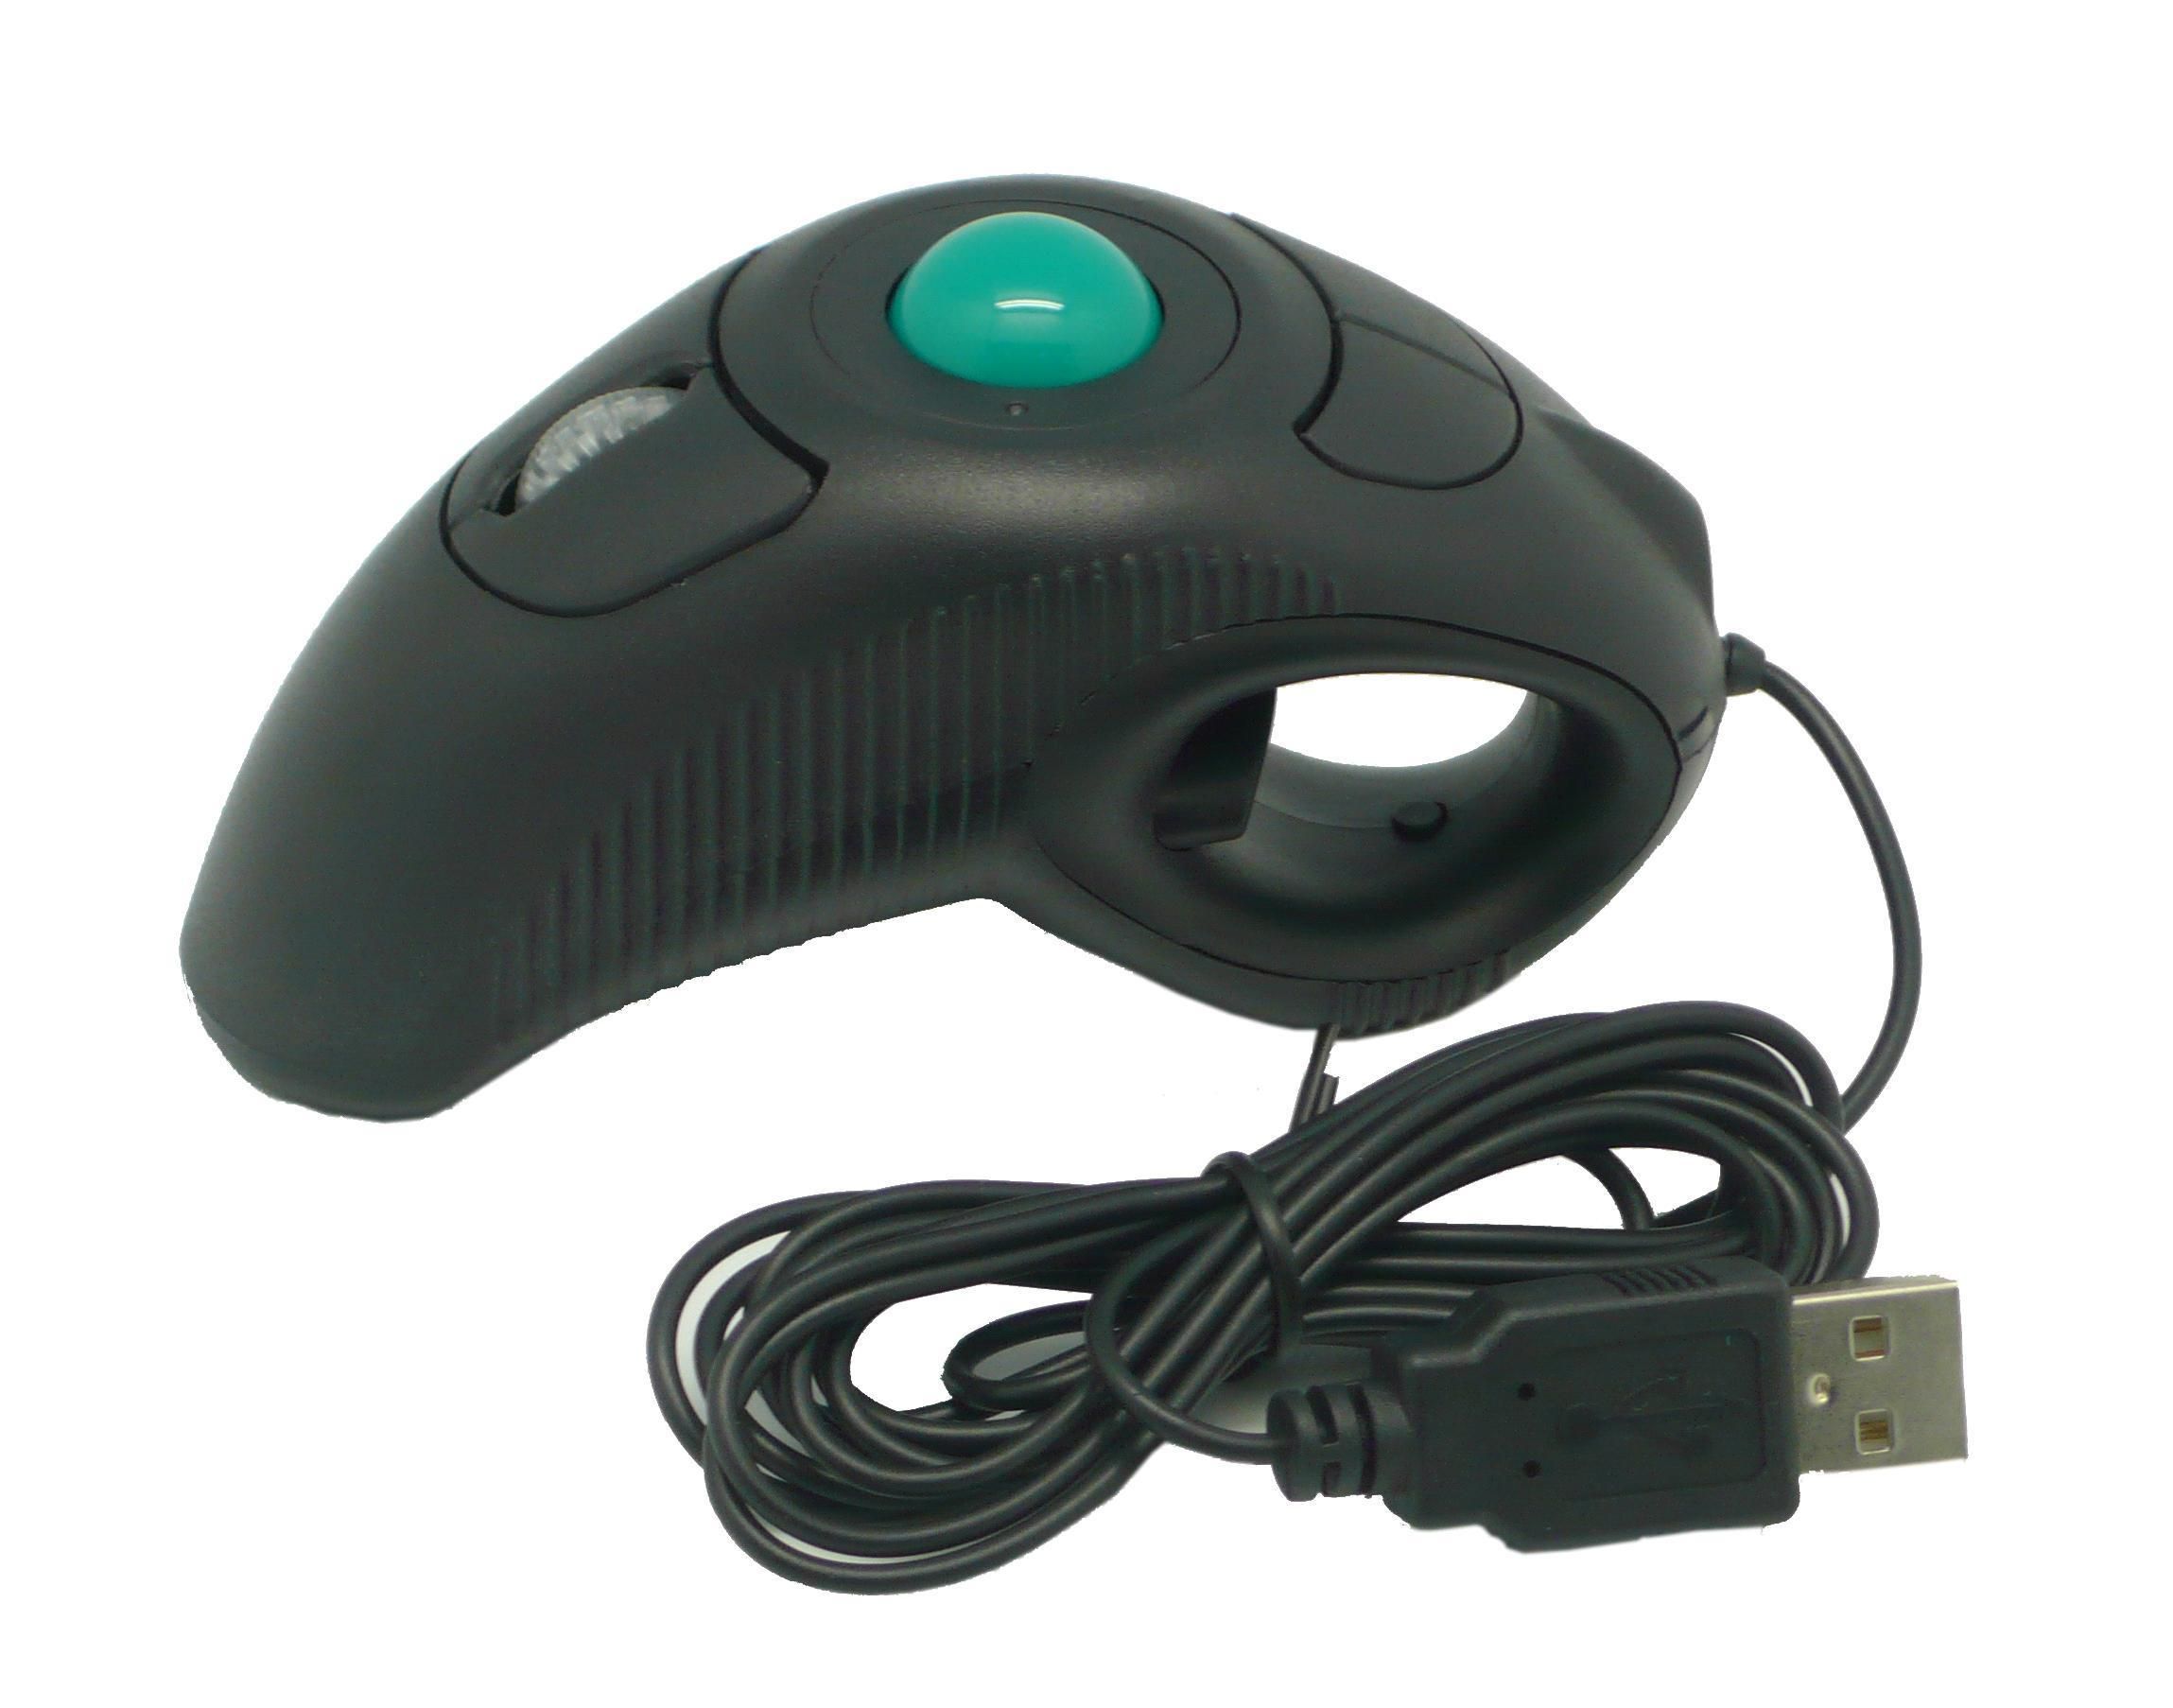 Wired USB2.0 Finger Handheld Ambidextrous Mouse Mice With Trackball Mouse for Laptop Desktop PC Thumb Controlled Y-10